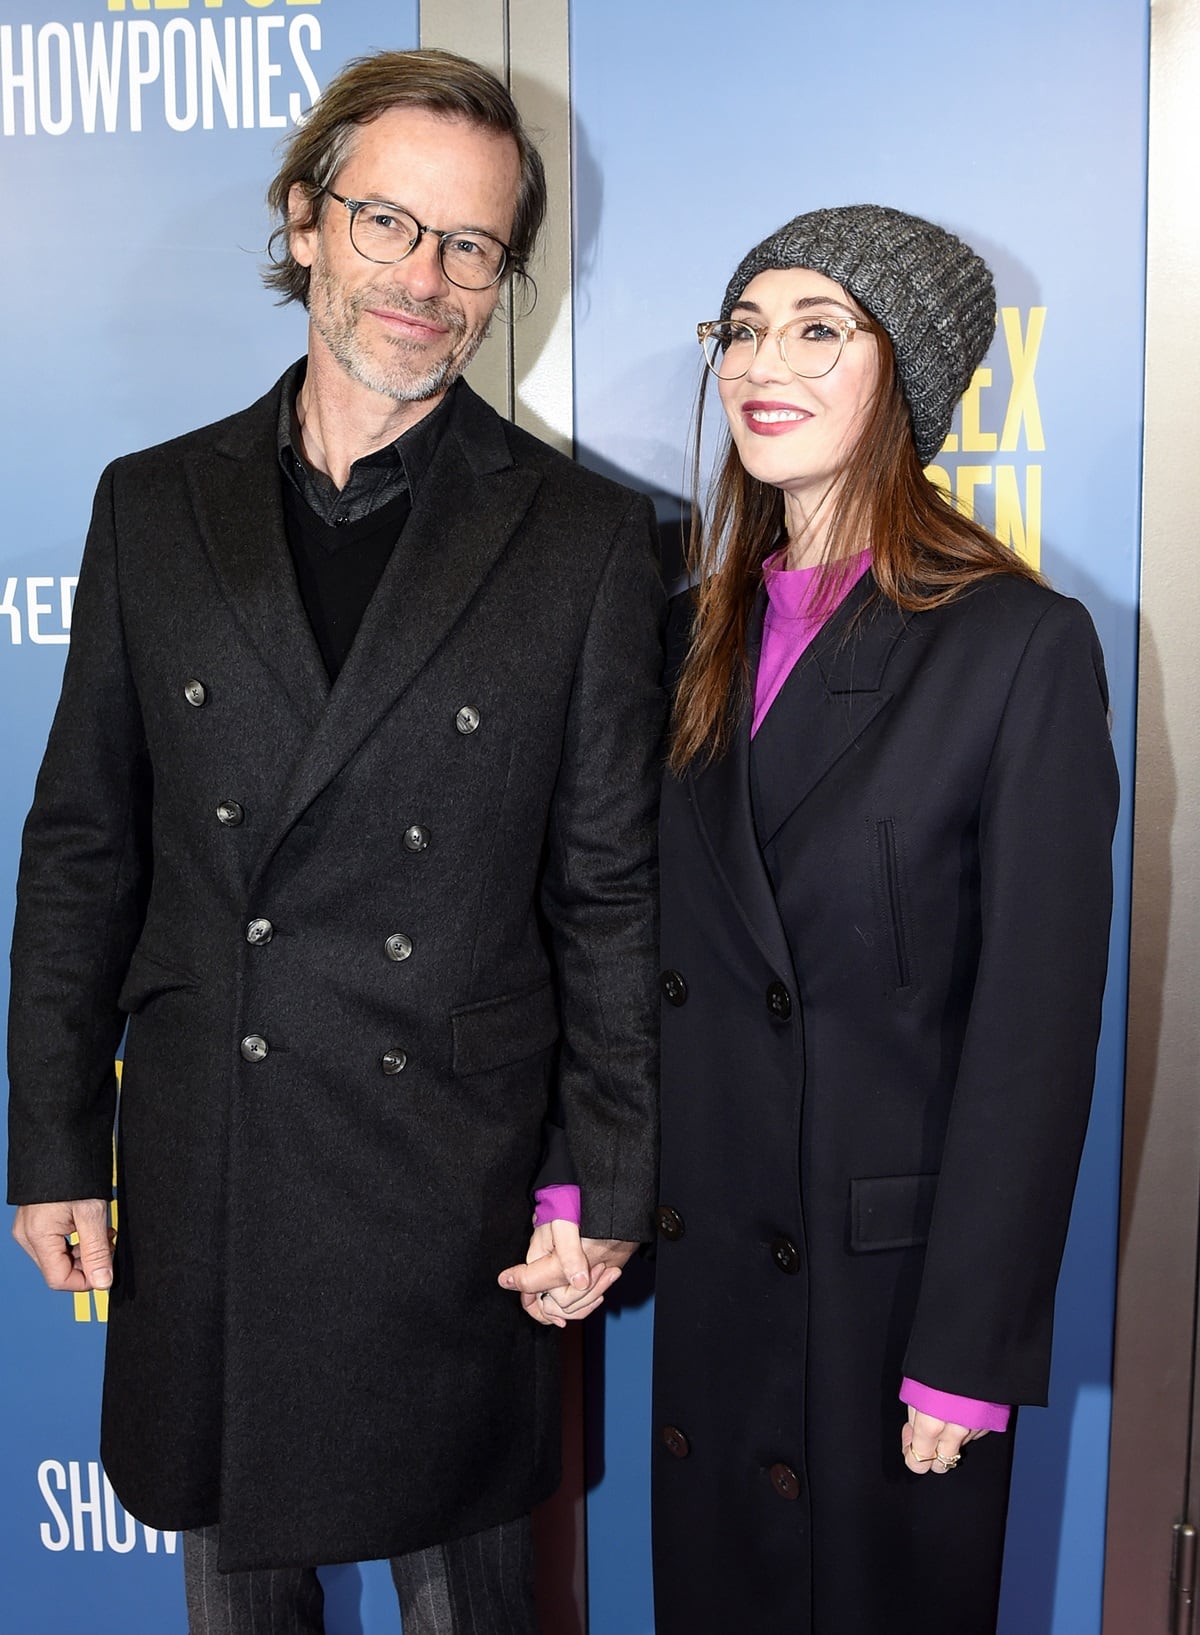 Carice van Houten and Guy Pearce, who met on the set of the film "Brimstone," started dating and later welcomed their son, Monte Pearce, in 2016, coinciding with the film's premiere at the Venice Film Festival